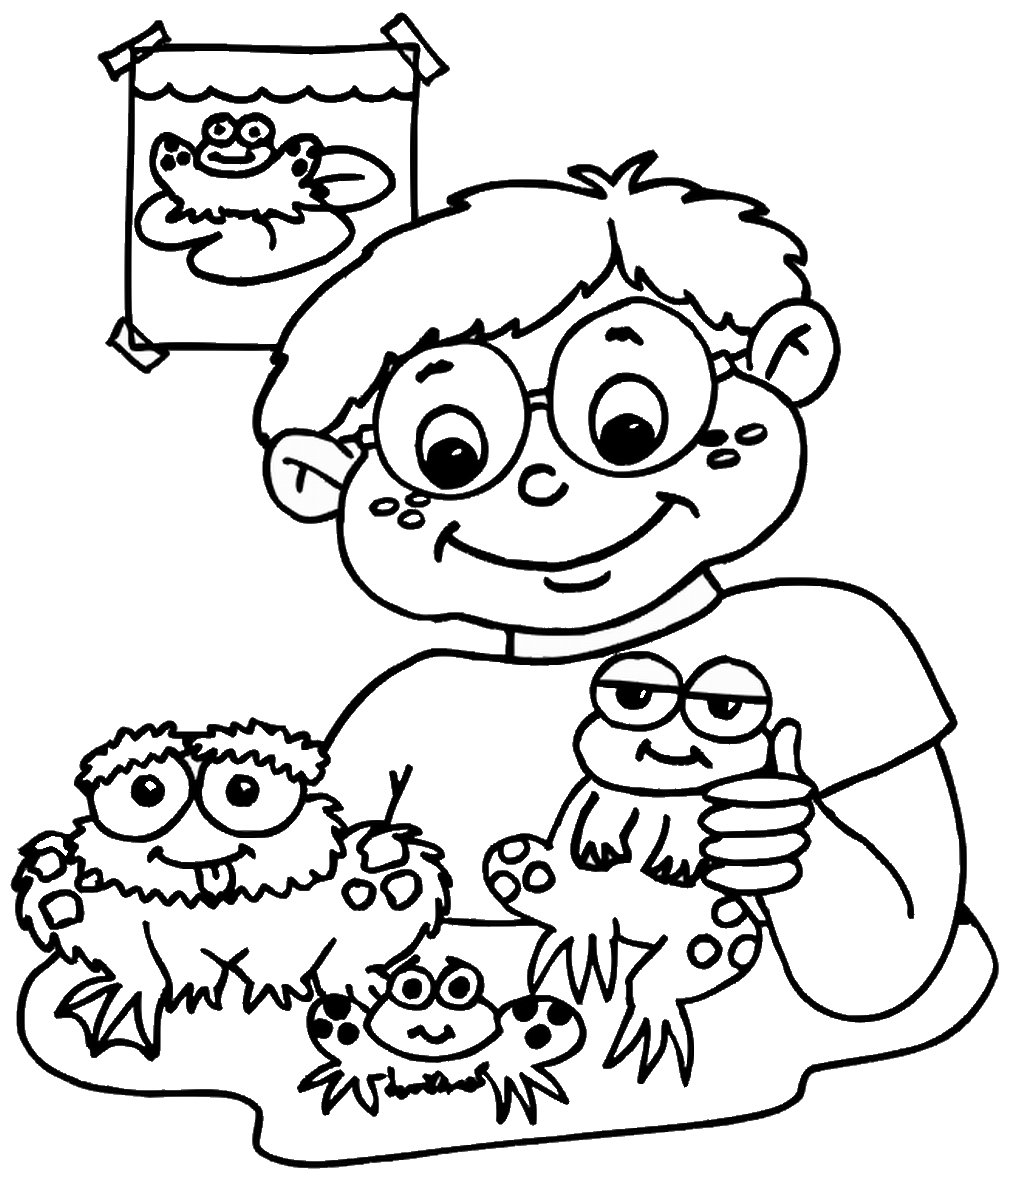 Download Frog Coloring Pages